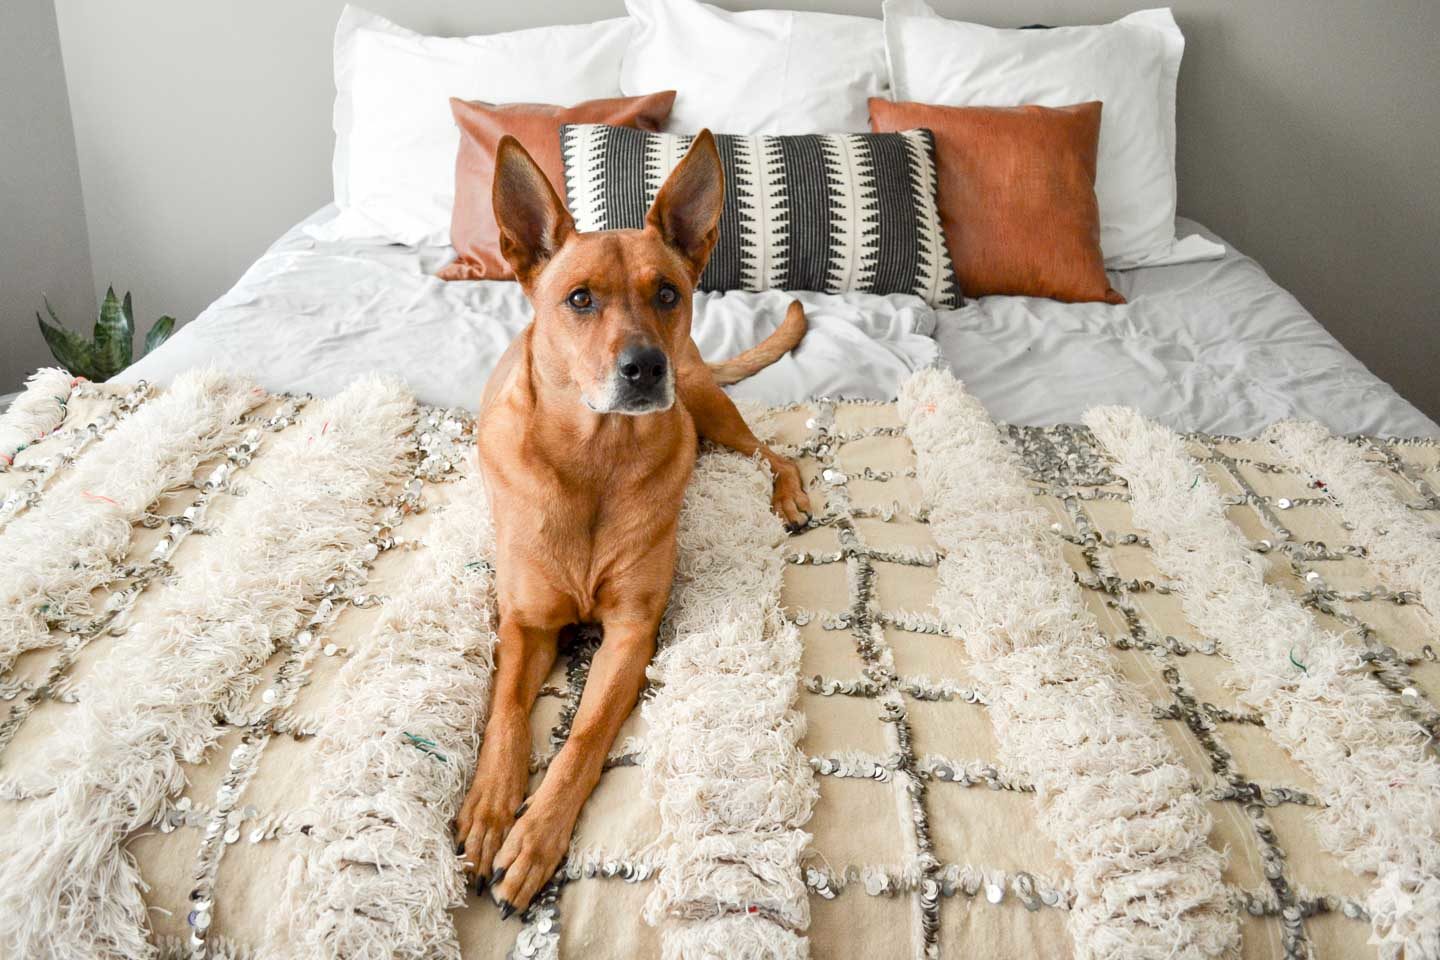 Charlie modeling master bedroom decor - moroccan wedding blanket and pillows